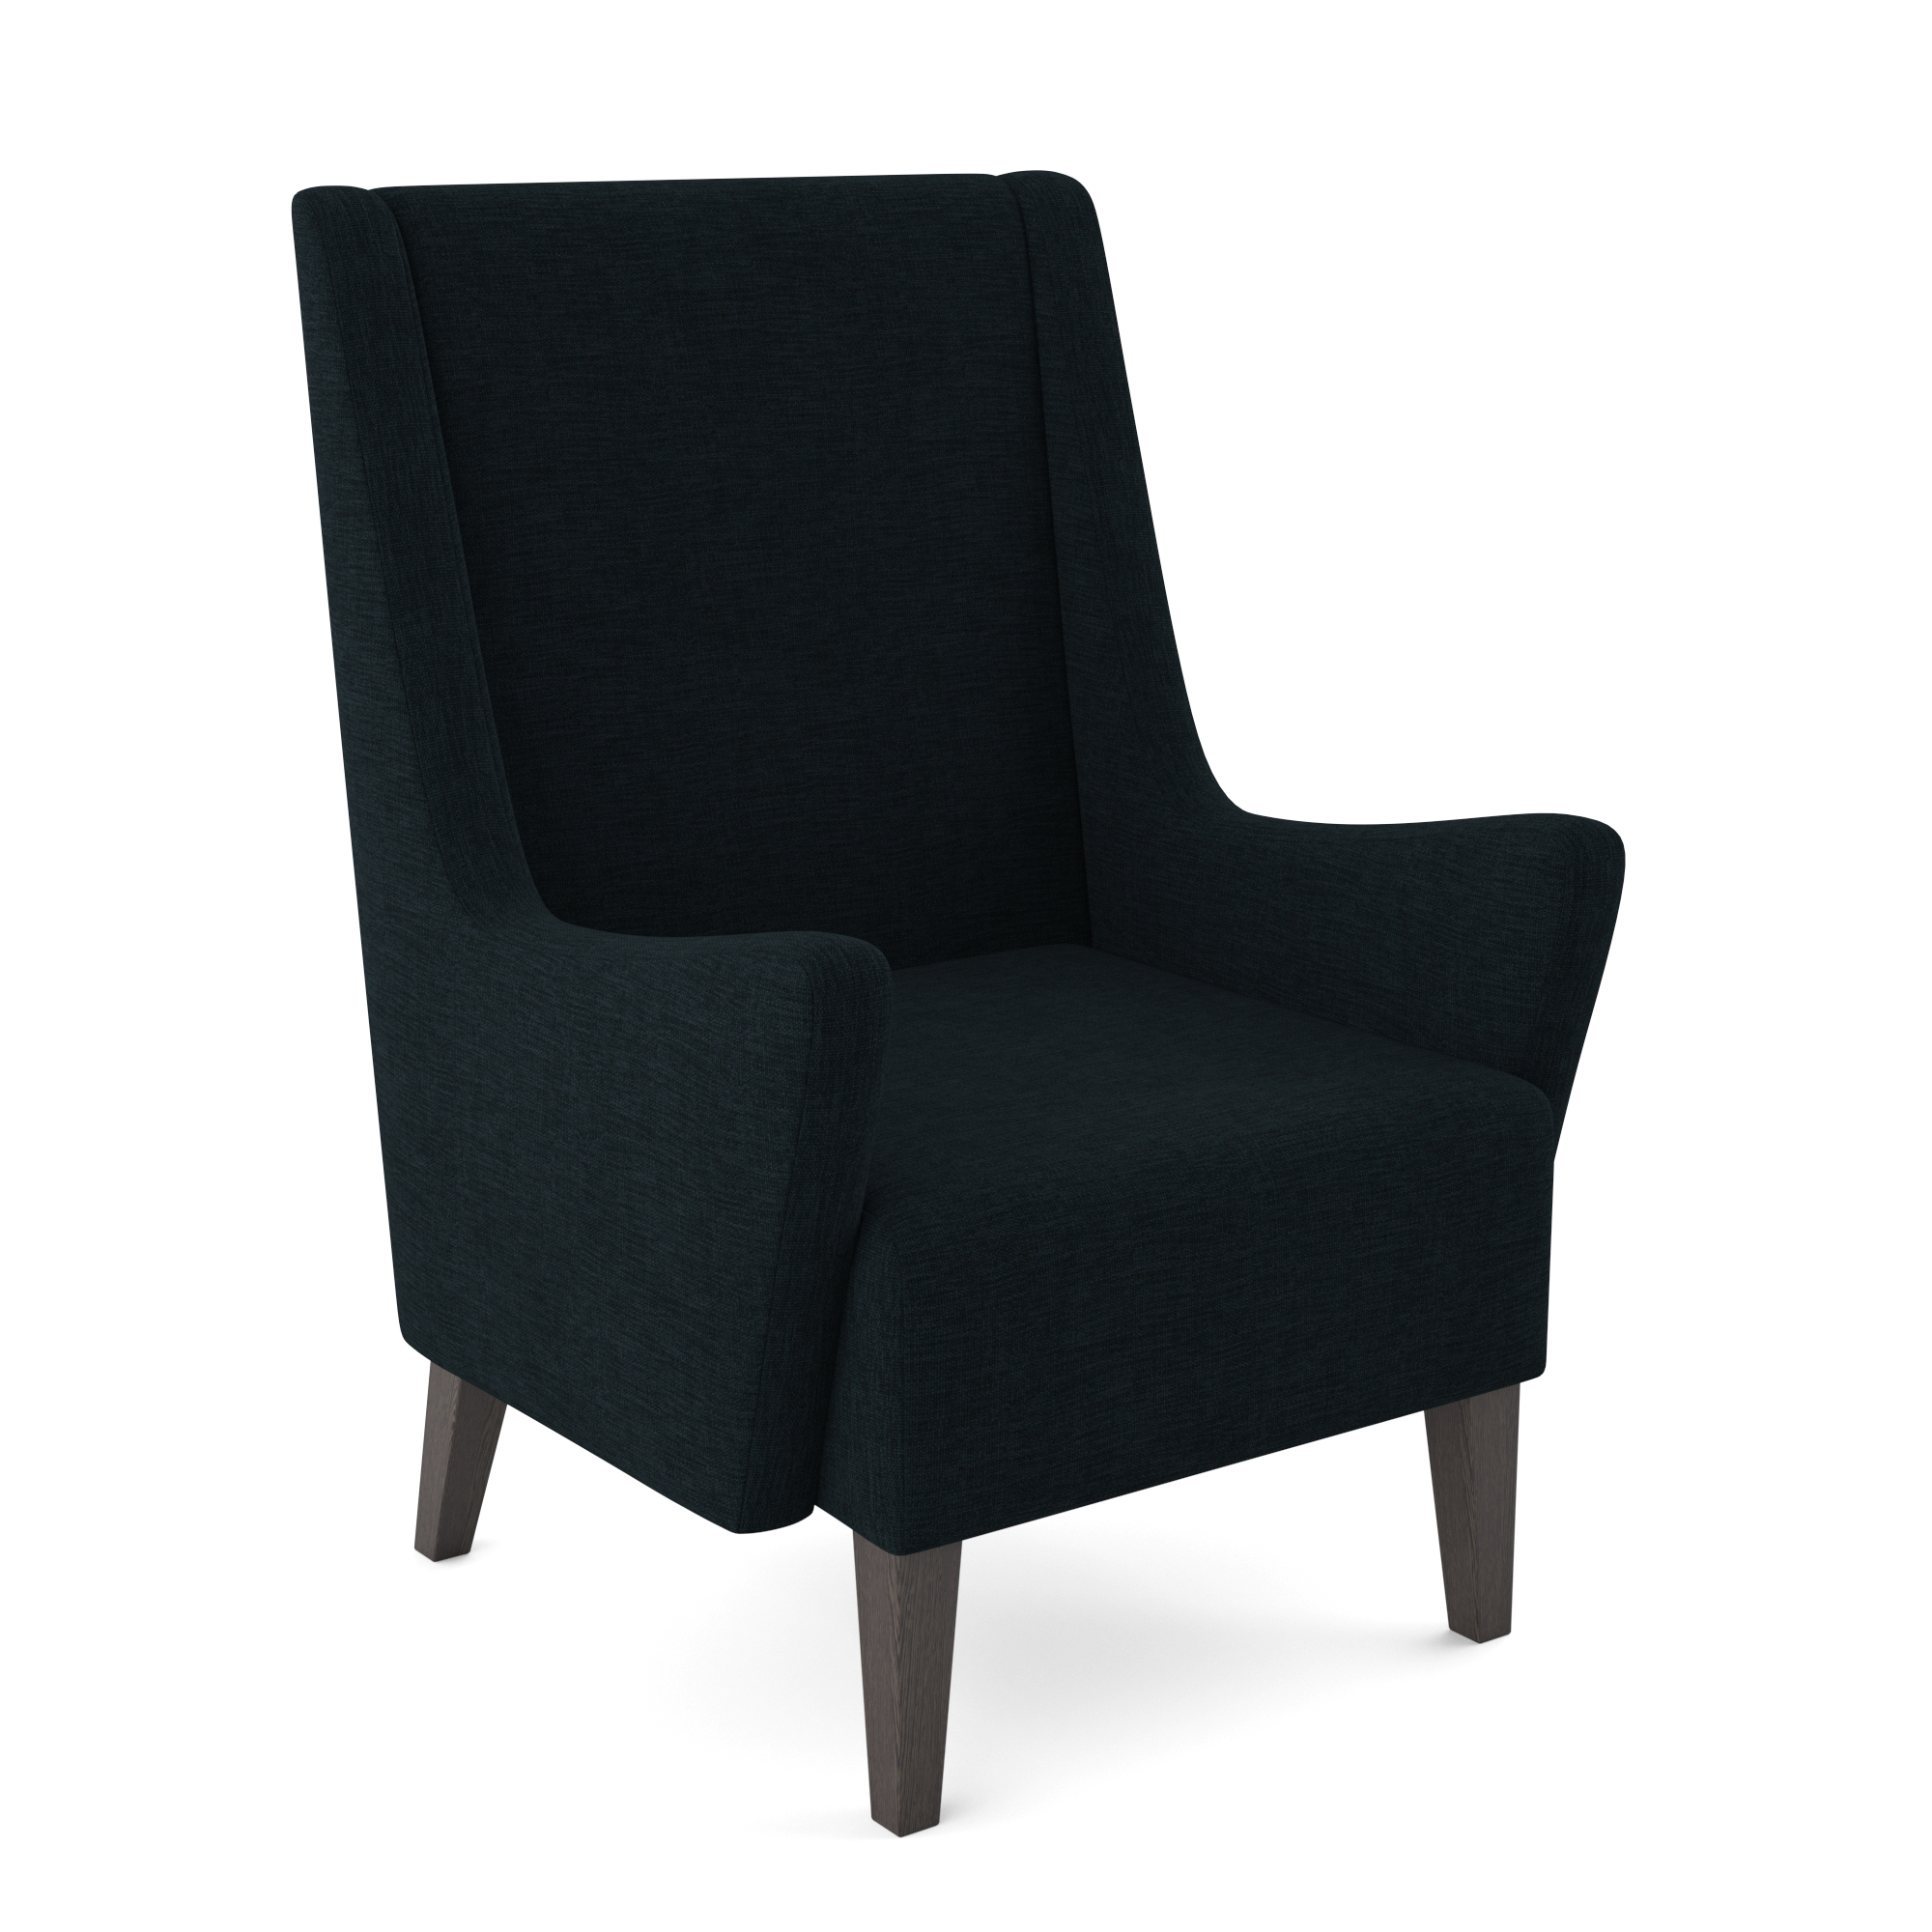 commercial lounge chair with wingback and wood legs in black